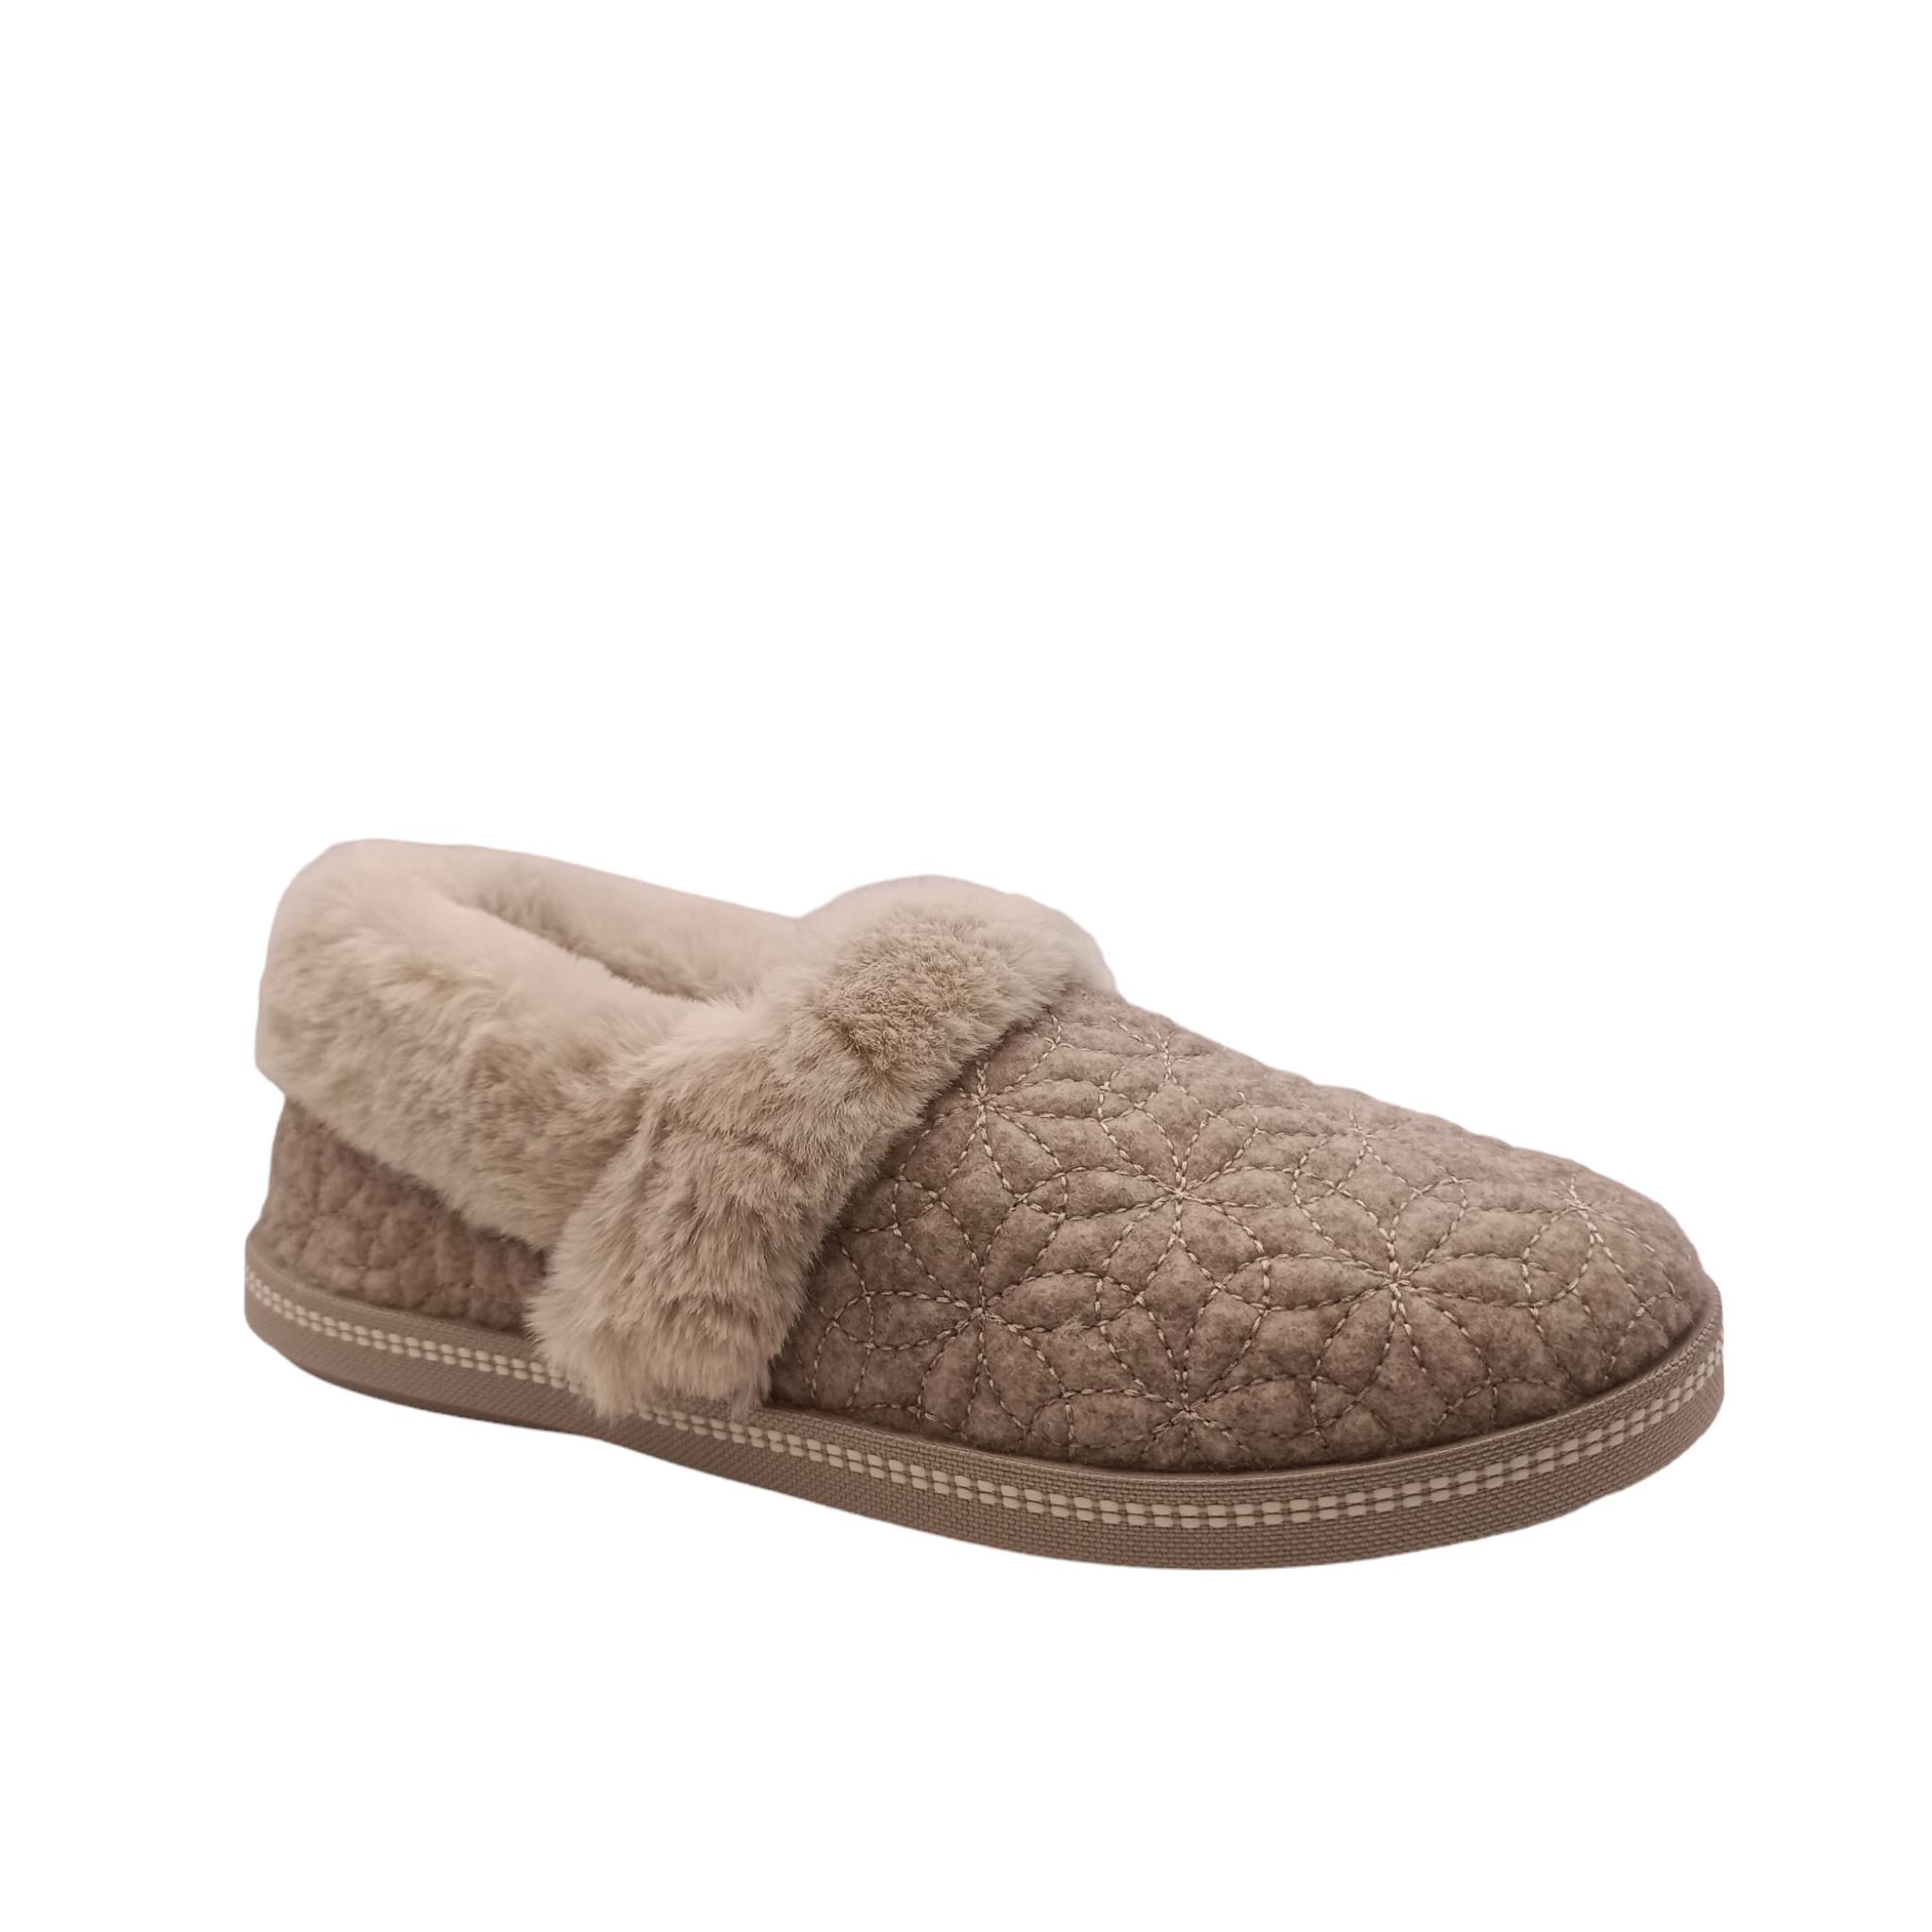 Side angled view of the Bright Blossom Skechers Slipper with a fluffy lining and a quilted flower pattern along the upper and back. Firm waterproof sole.